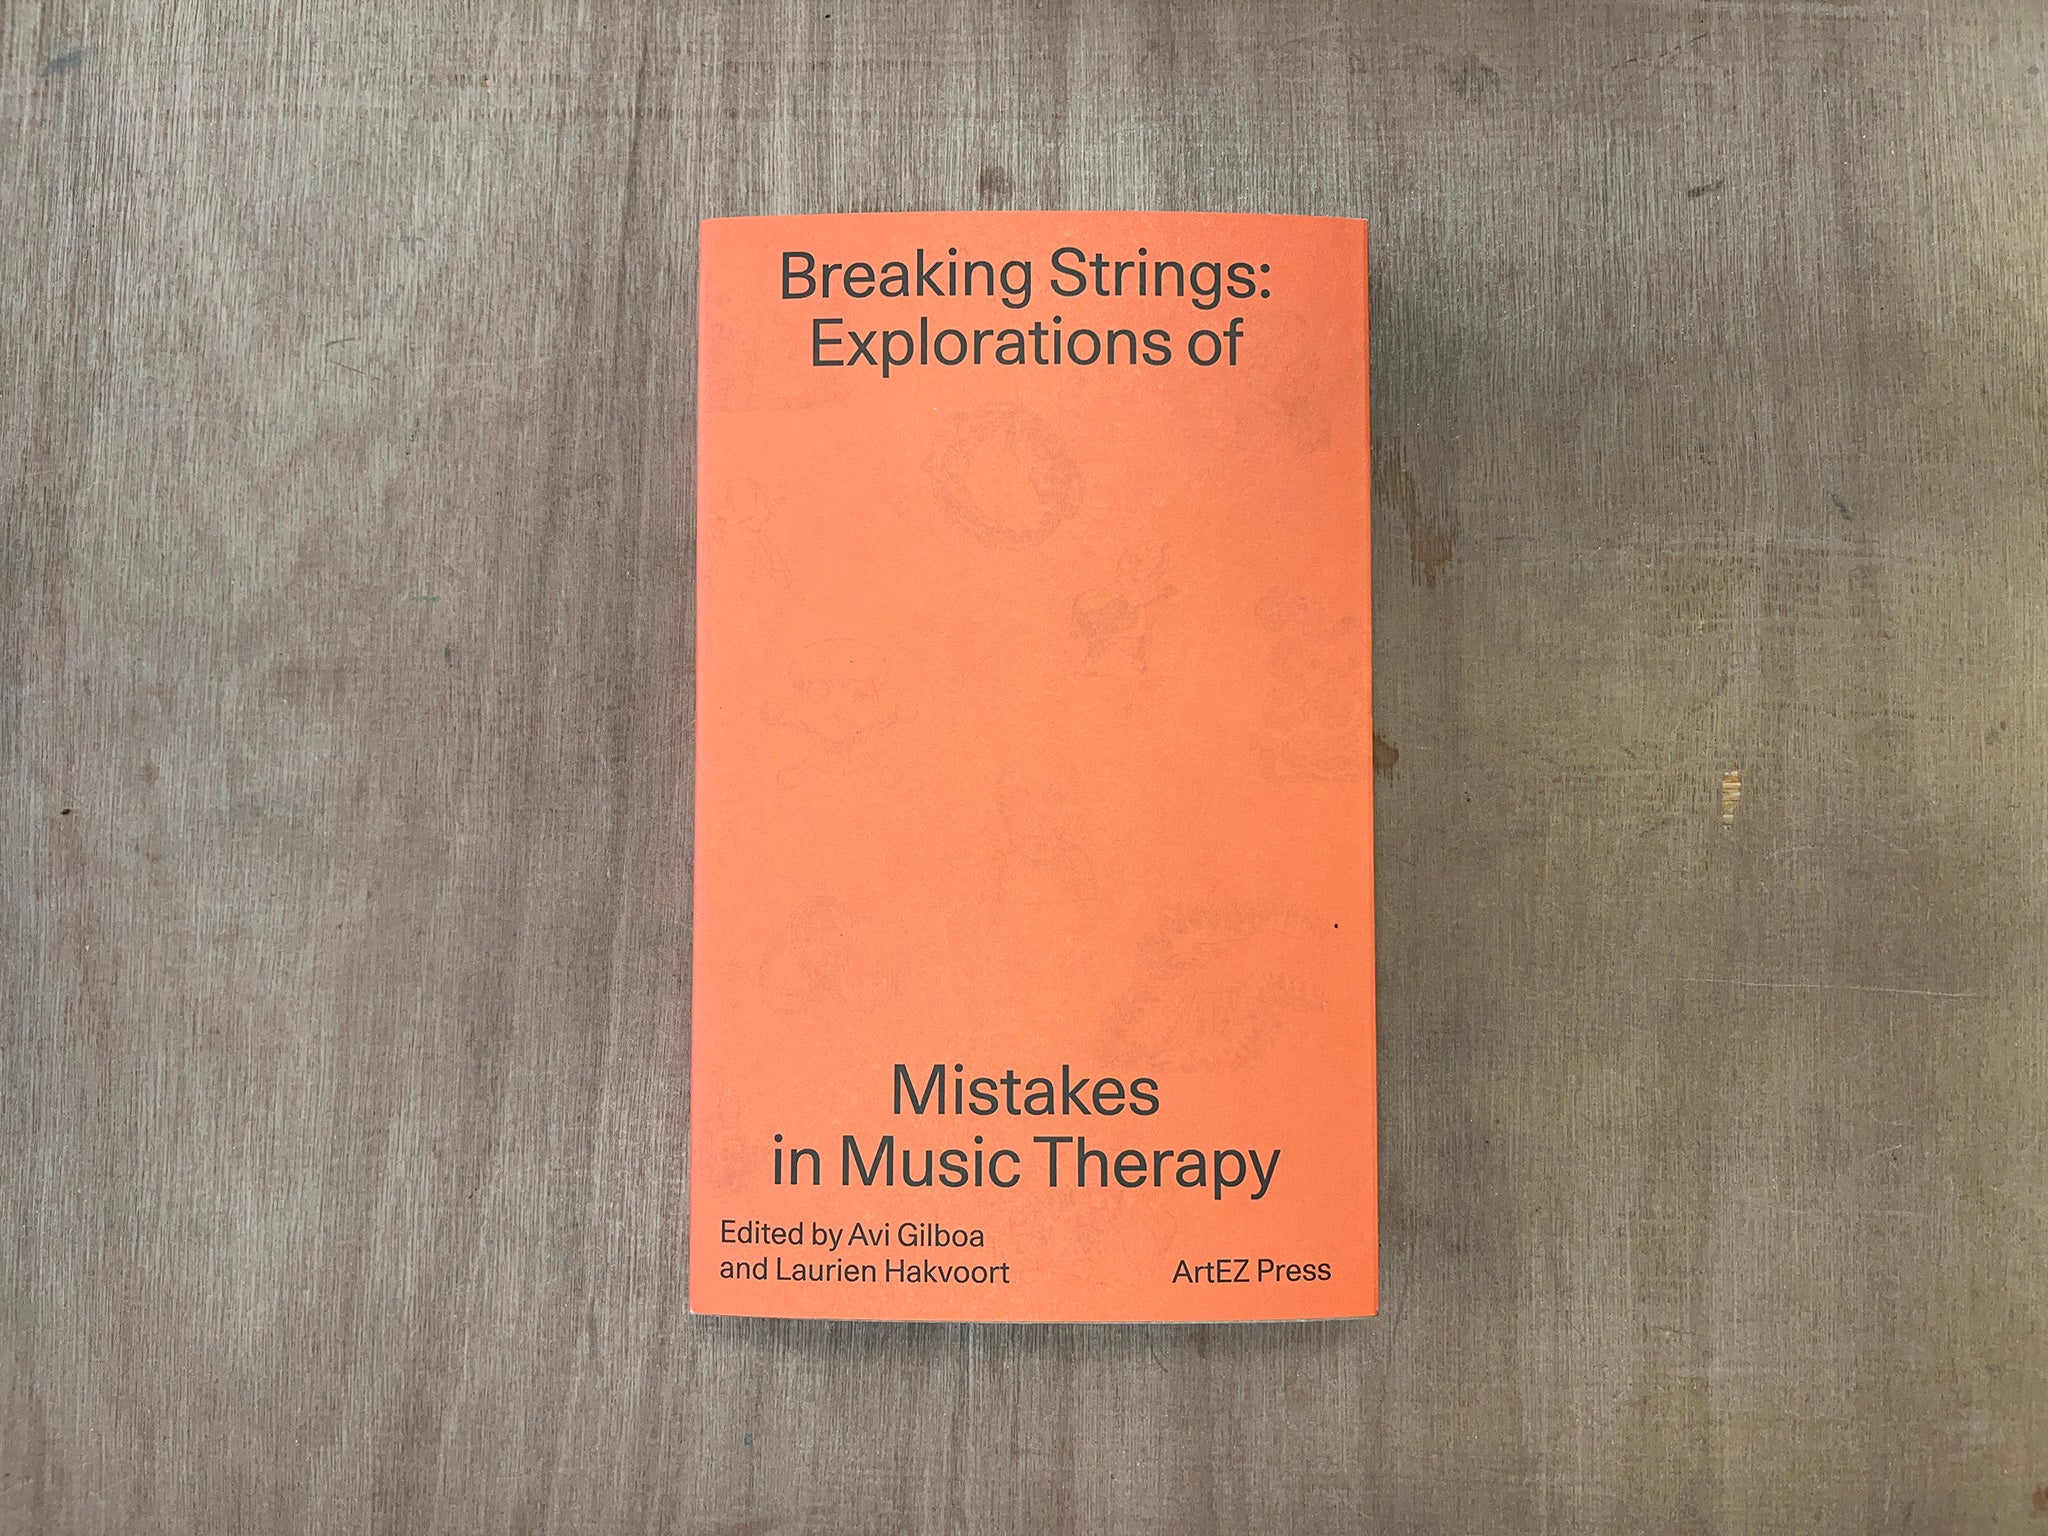 BREAKING STRINGS: EXPLORATIONS OF MISTAKES IN MUSIC THERAPY Ed. by Avi Gilboa & Laurien Hakvoort